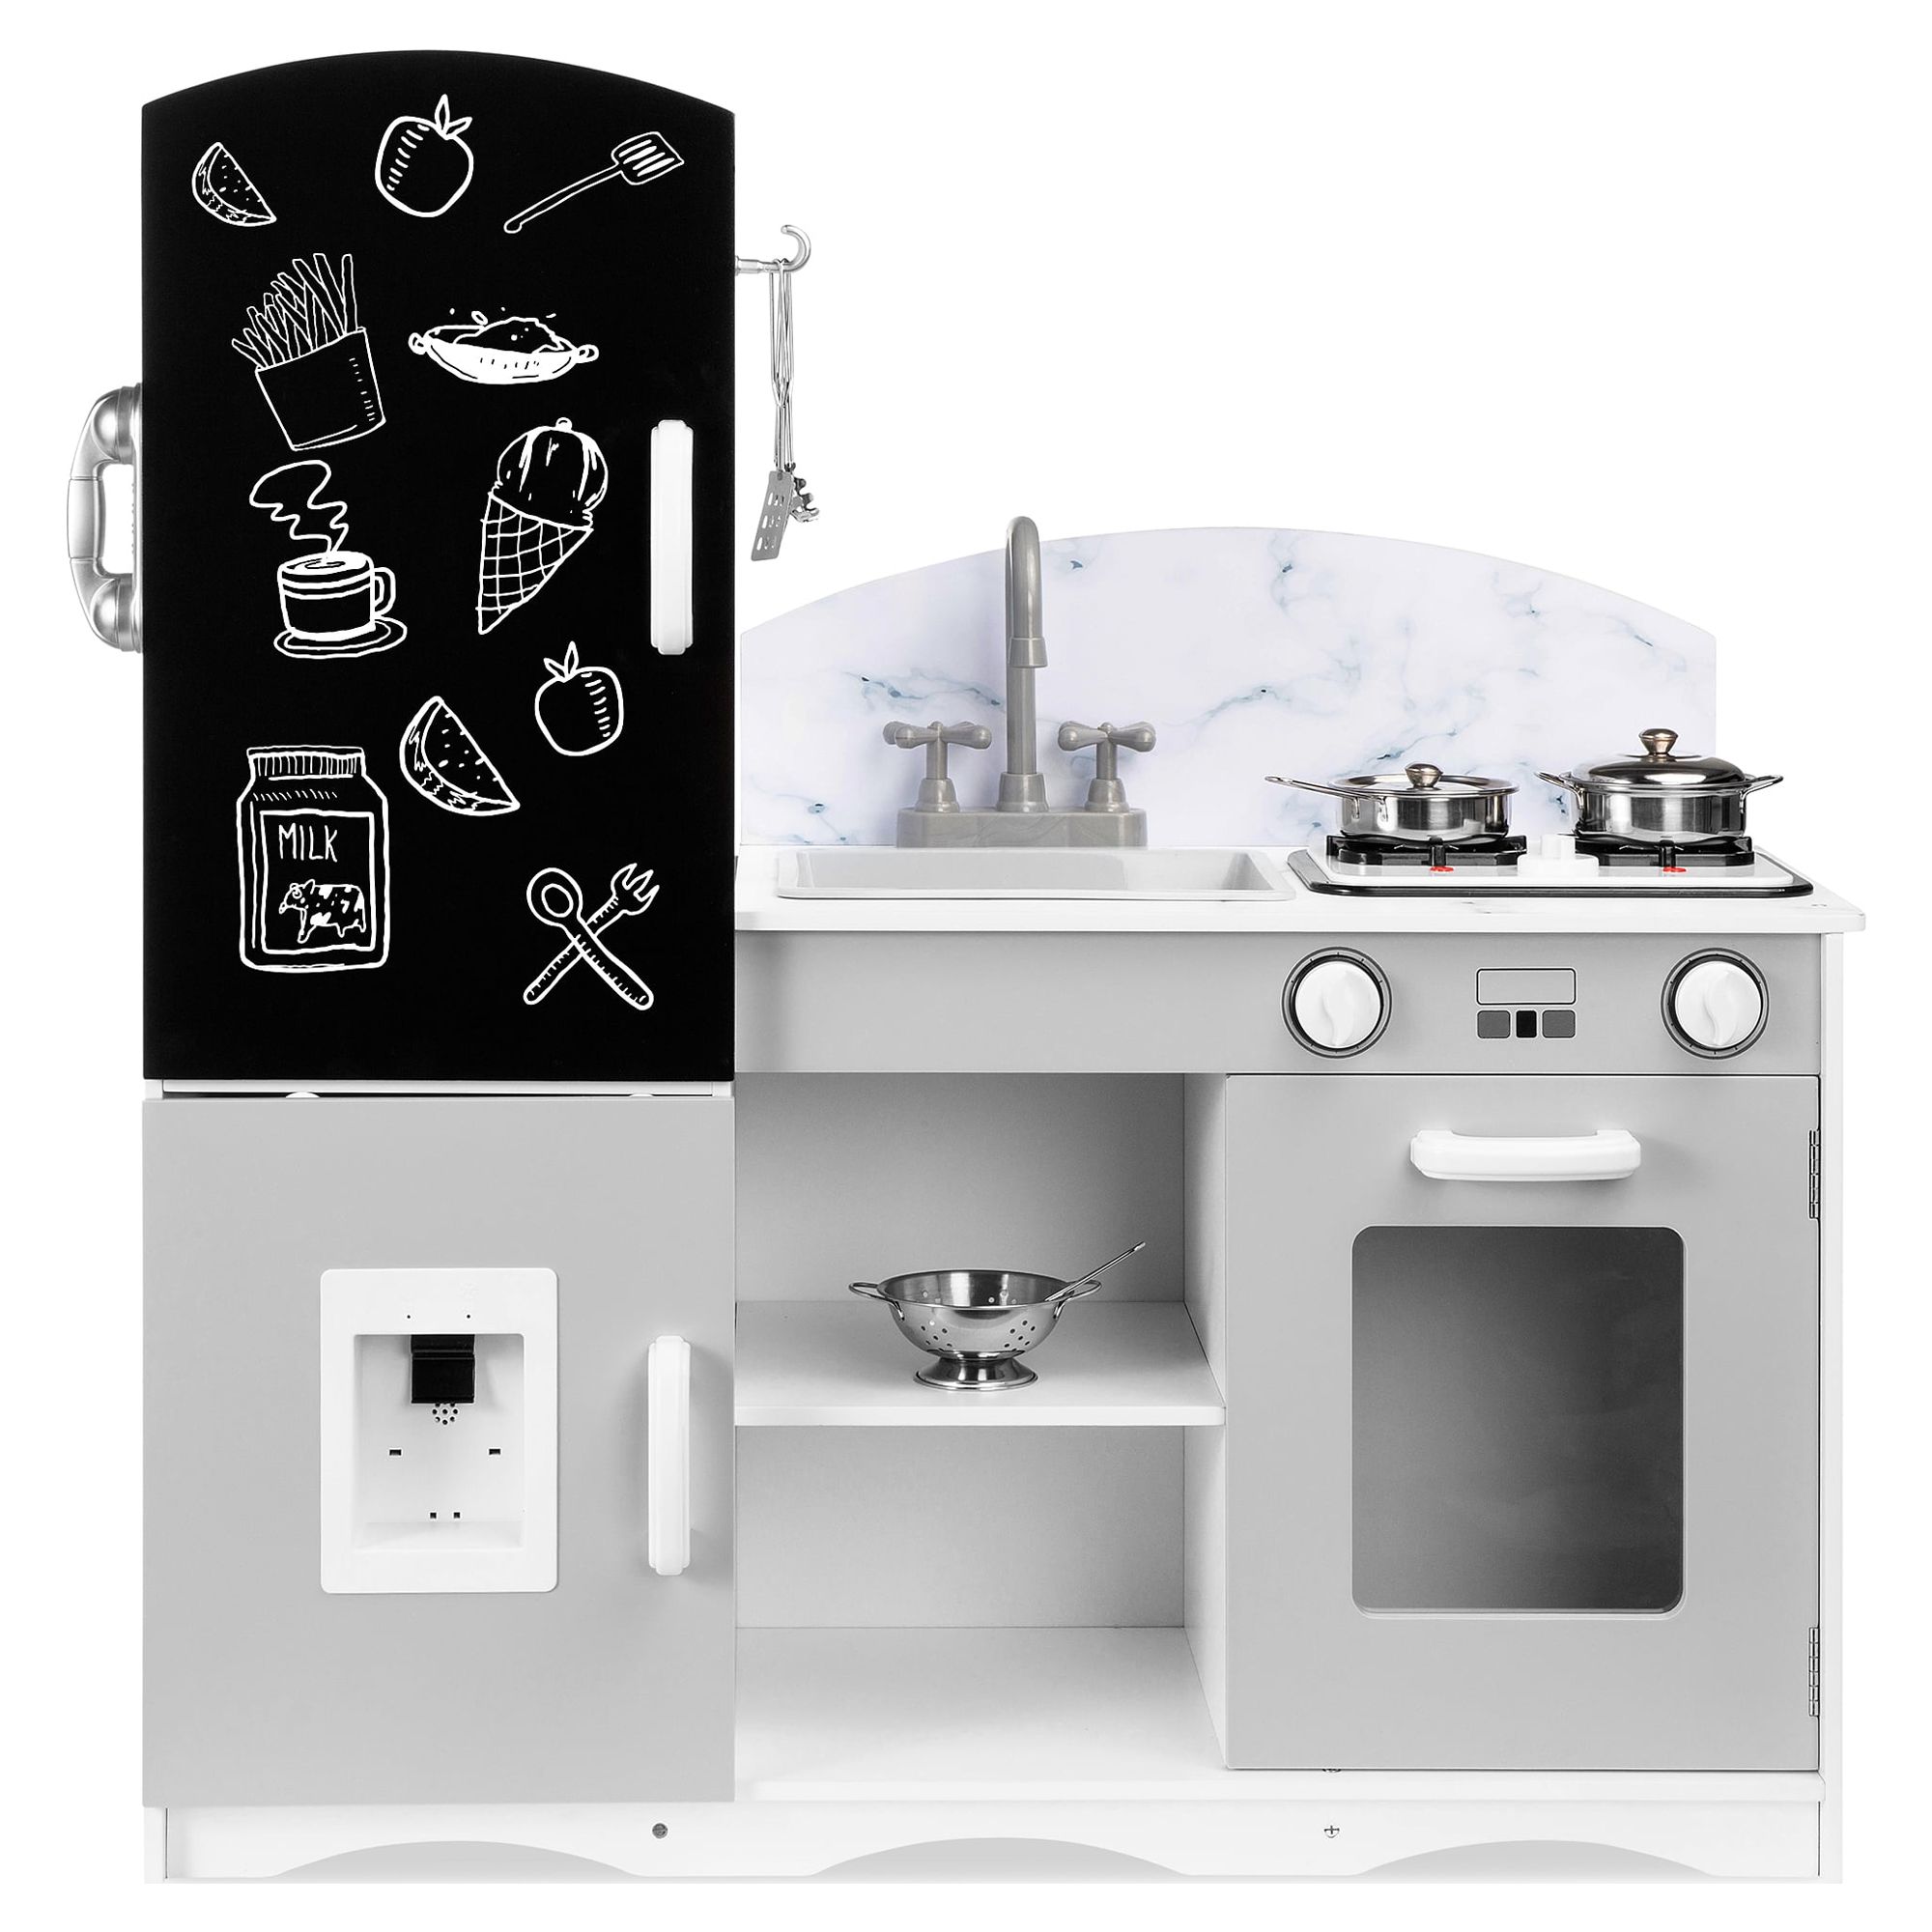 Best Choice Products Wooden Pretend Play Kitchen Toy Set for Kids w/ Chalkboard, Marble Backdrop, 7 Accessories - Gray - image 1 of 8